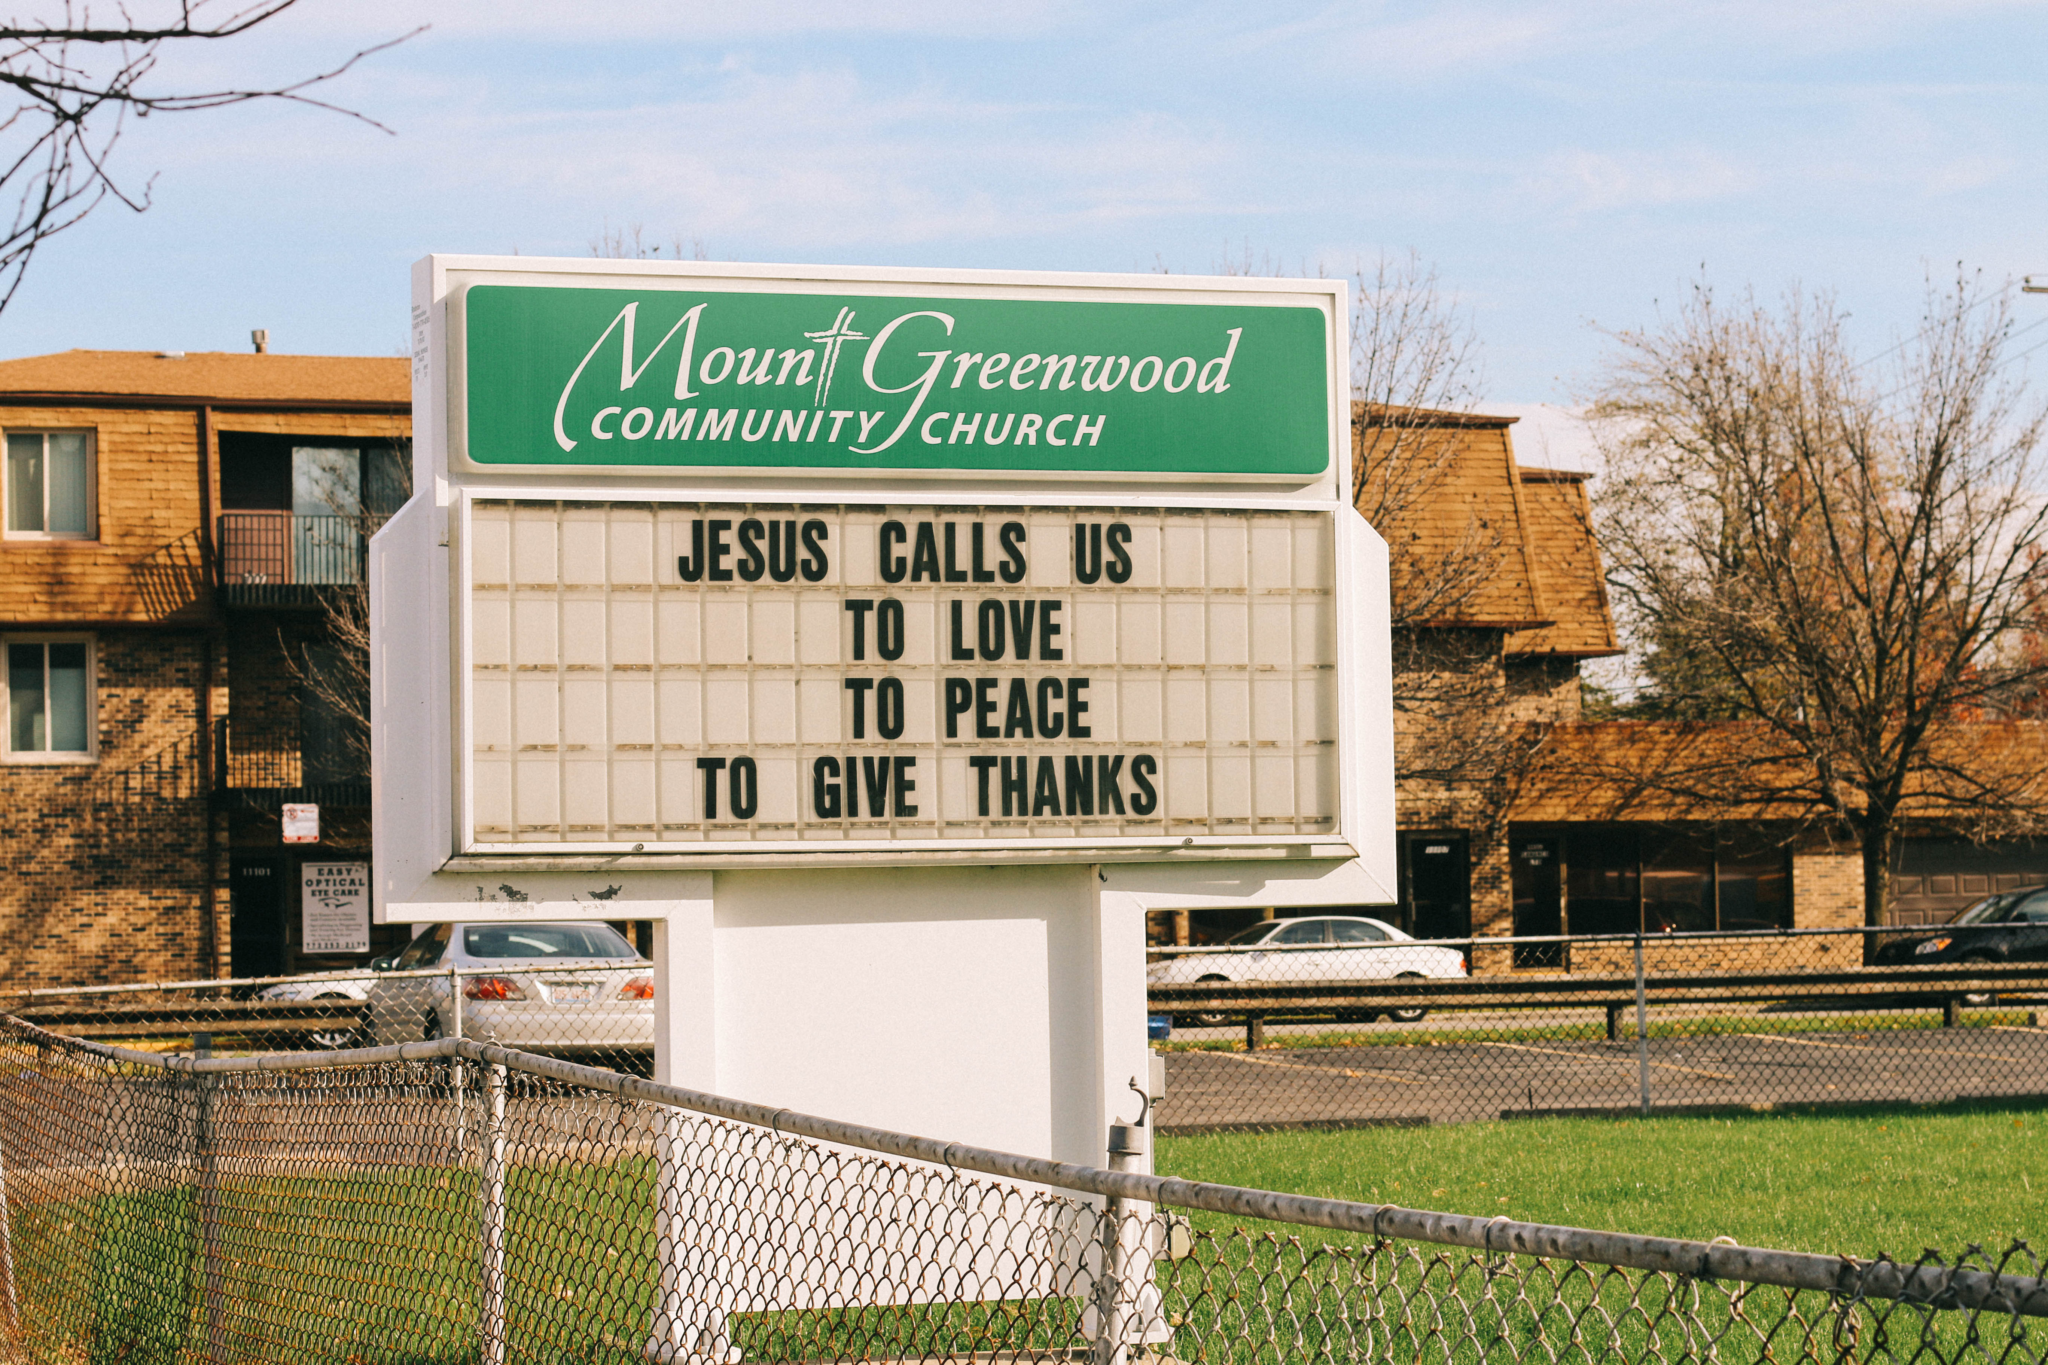 Mount Greenwood Community Church is one of two large churches on 111th Street. It stands about half a mile from where Joshua Beal was killed.